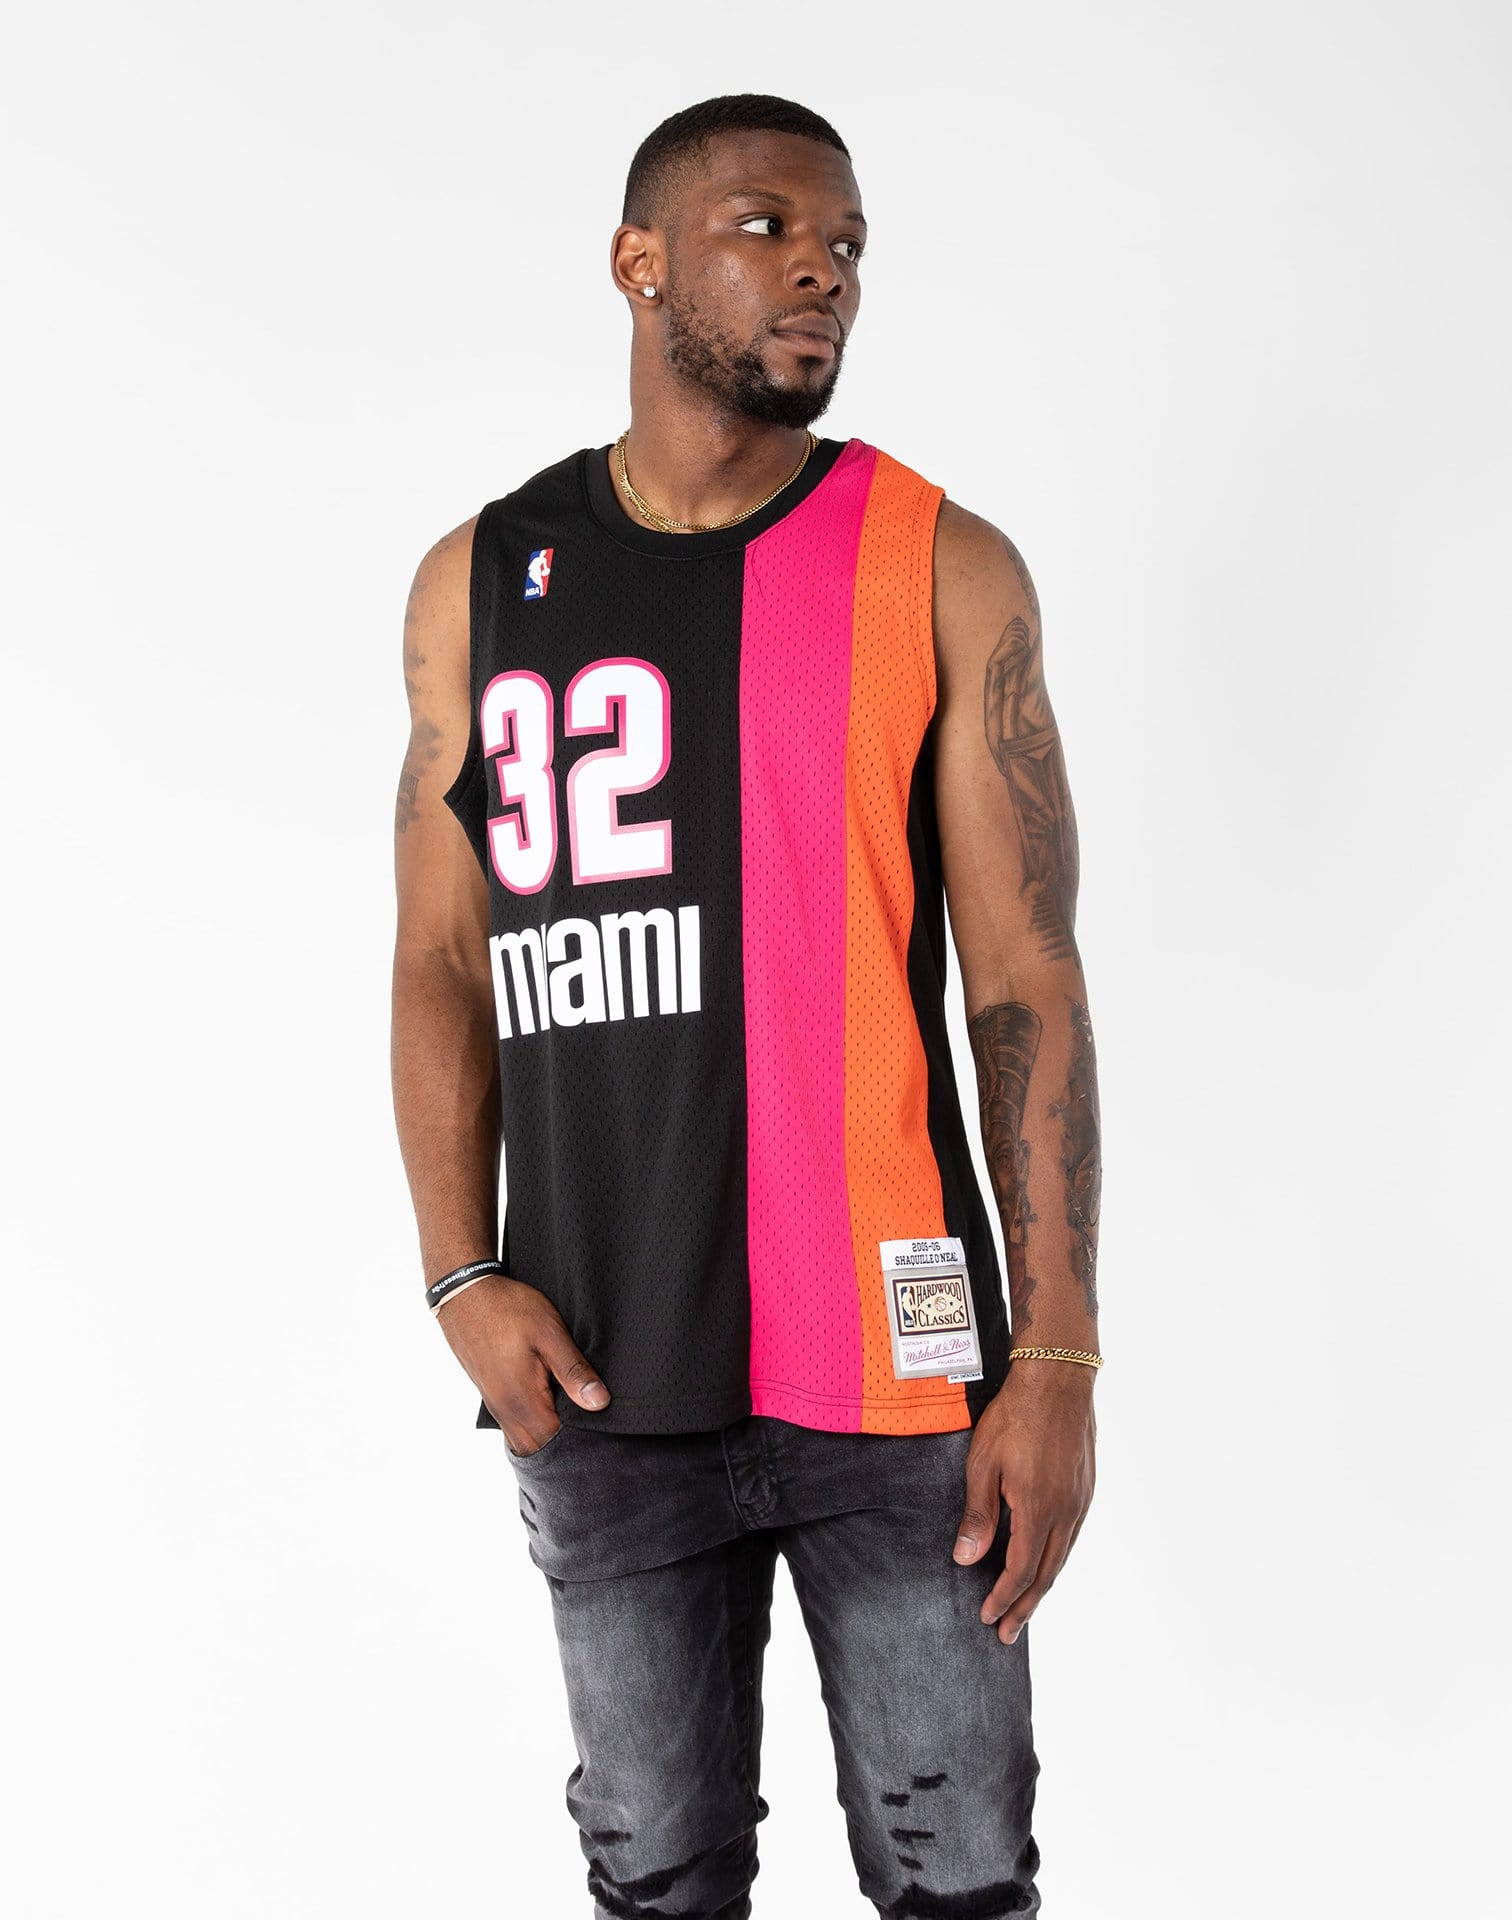 NBA Throwback Jerseys - Miami Heat Shaquille O'Neal & more